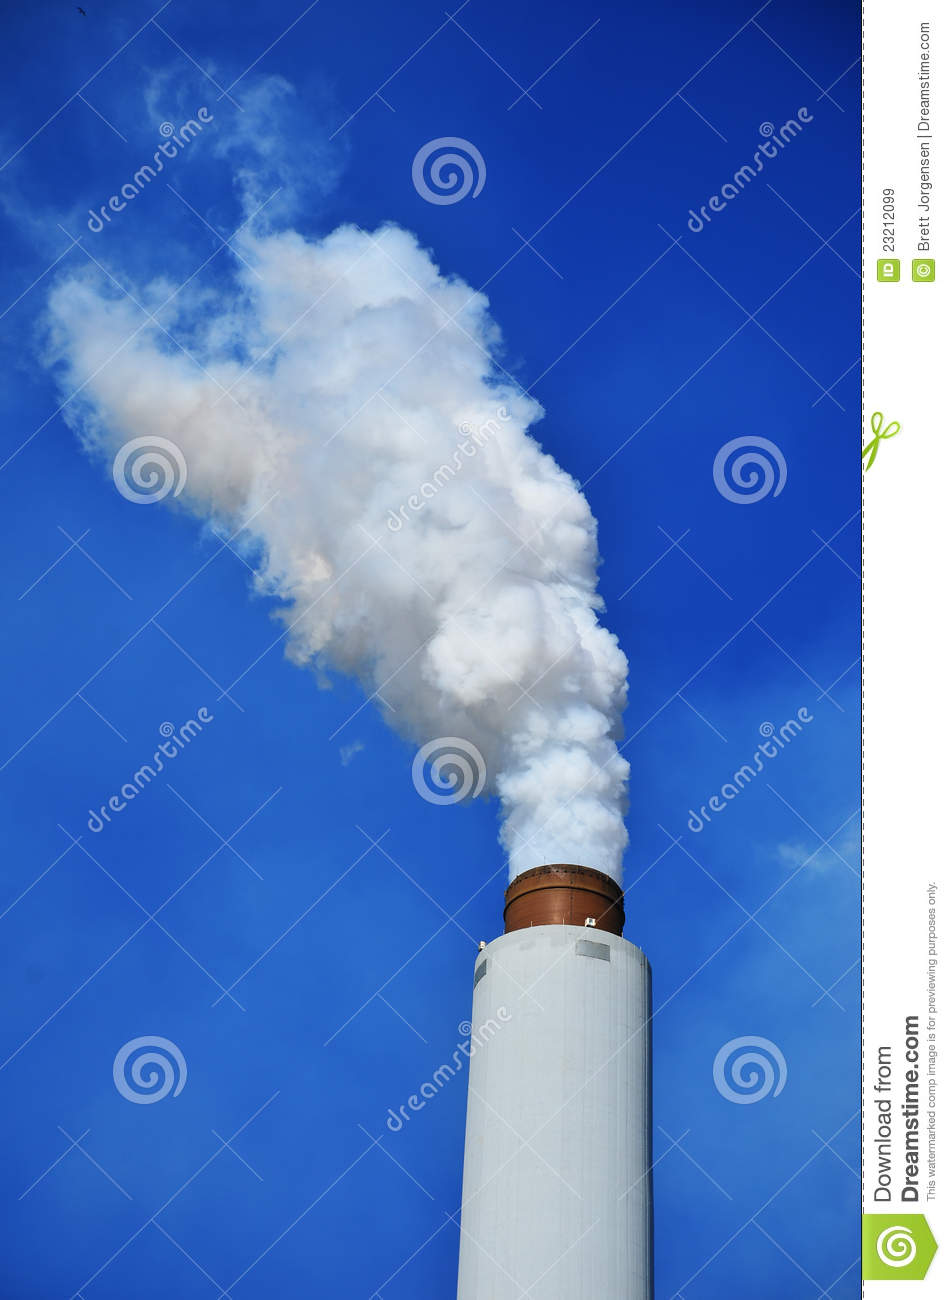 Smokestack From A Steel Mill Royalty Free Stock Images   Image